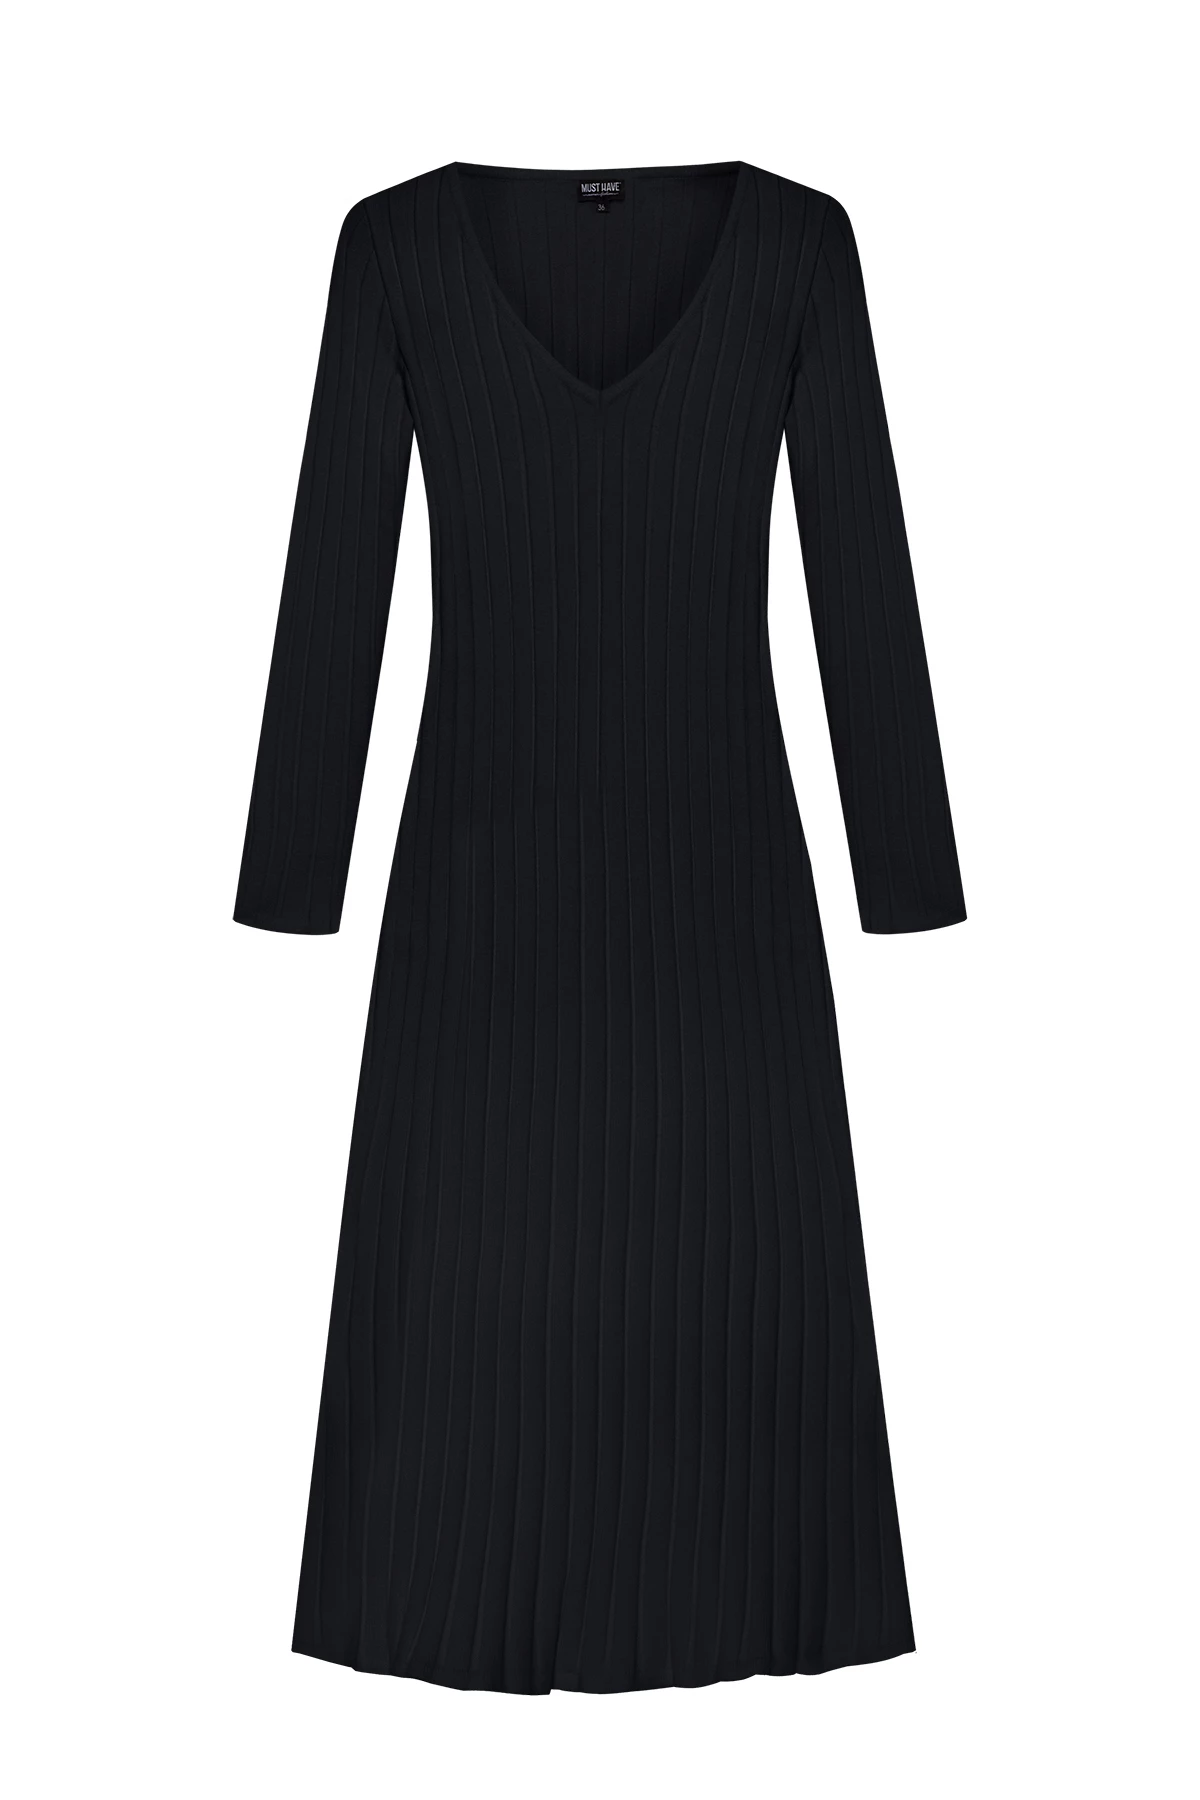 Black ribbed knitted midi dress with viscose, photo 6